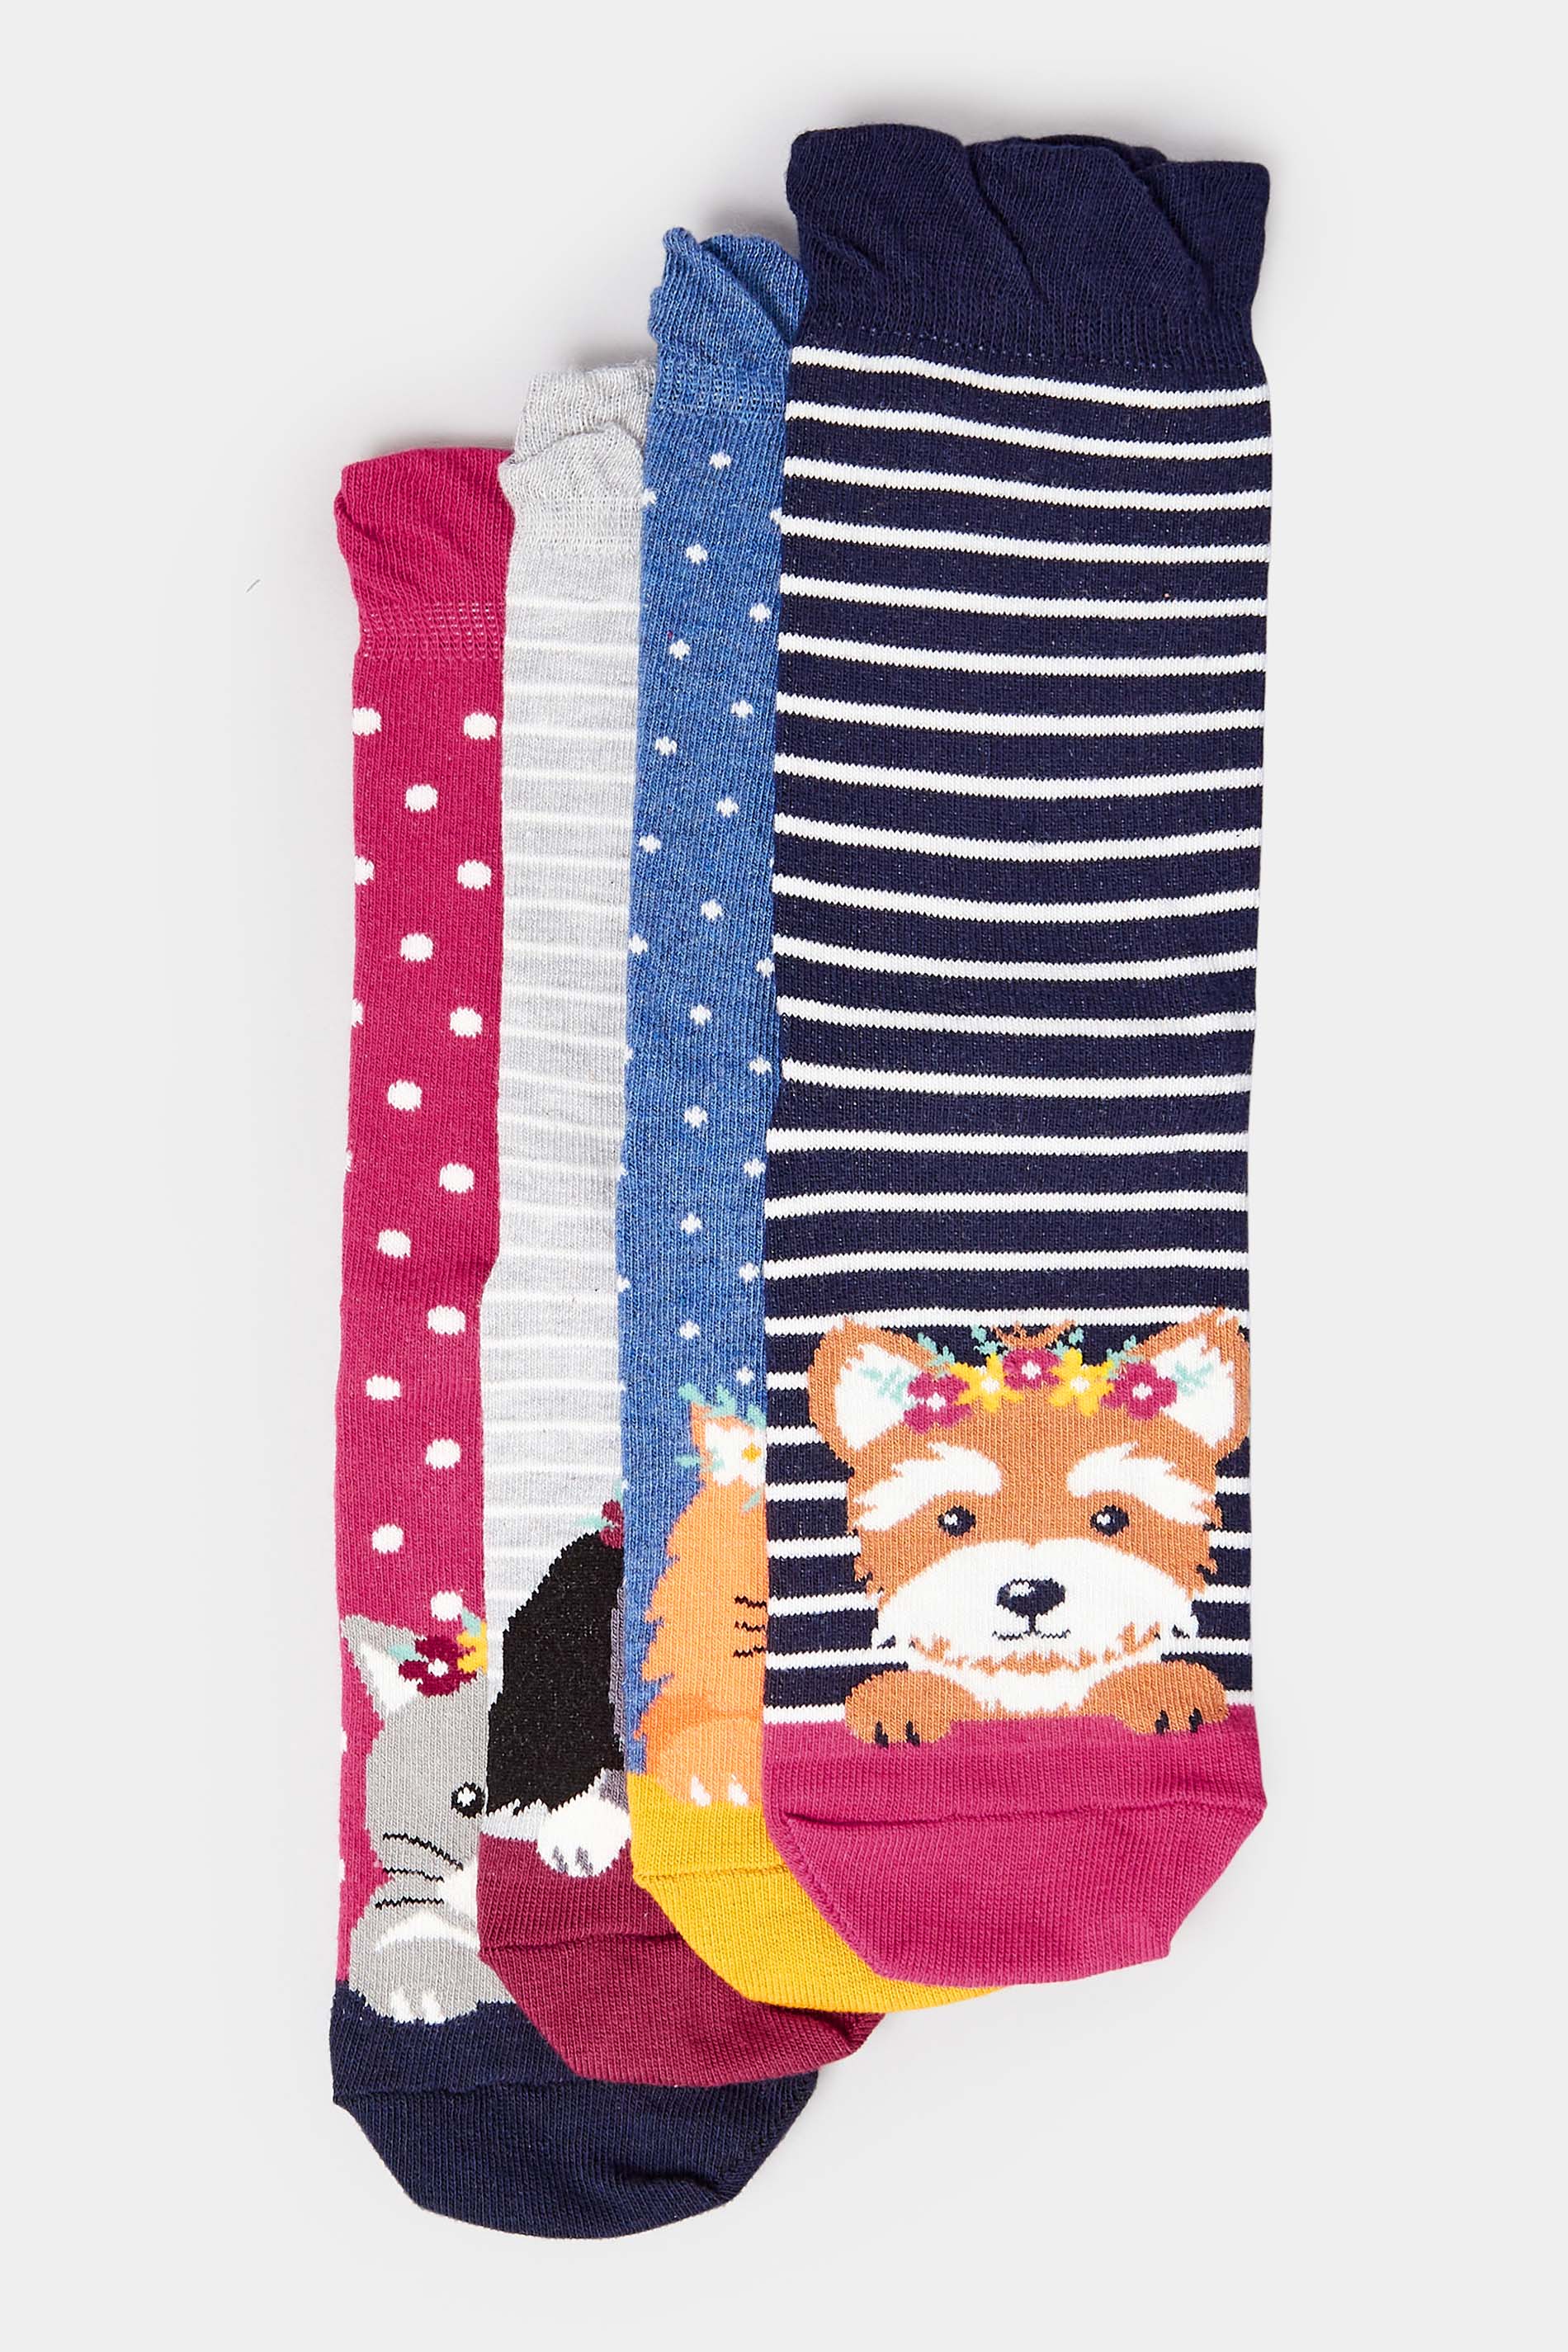 4 PACK Navy Blue Animal Print Stripe Ankle Socks | Yours Clothing  3